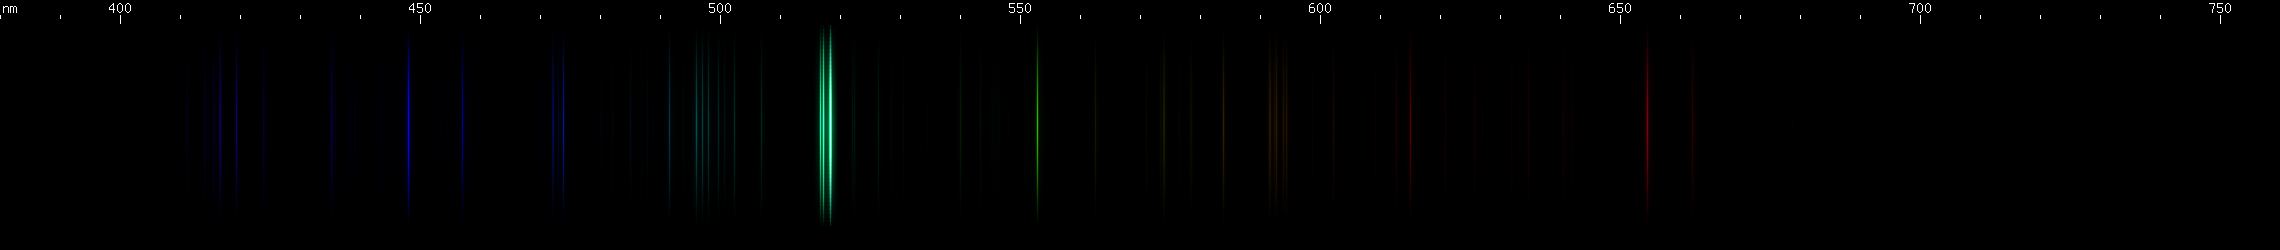 Spectral Lines of Magnesium